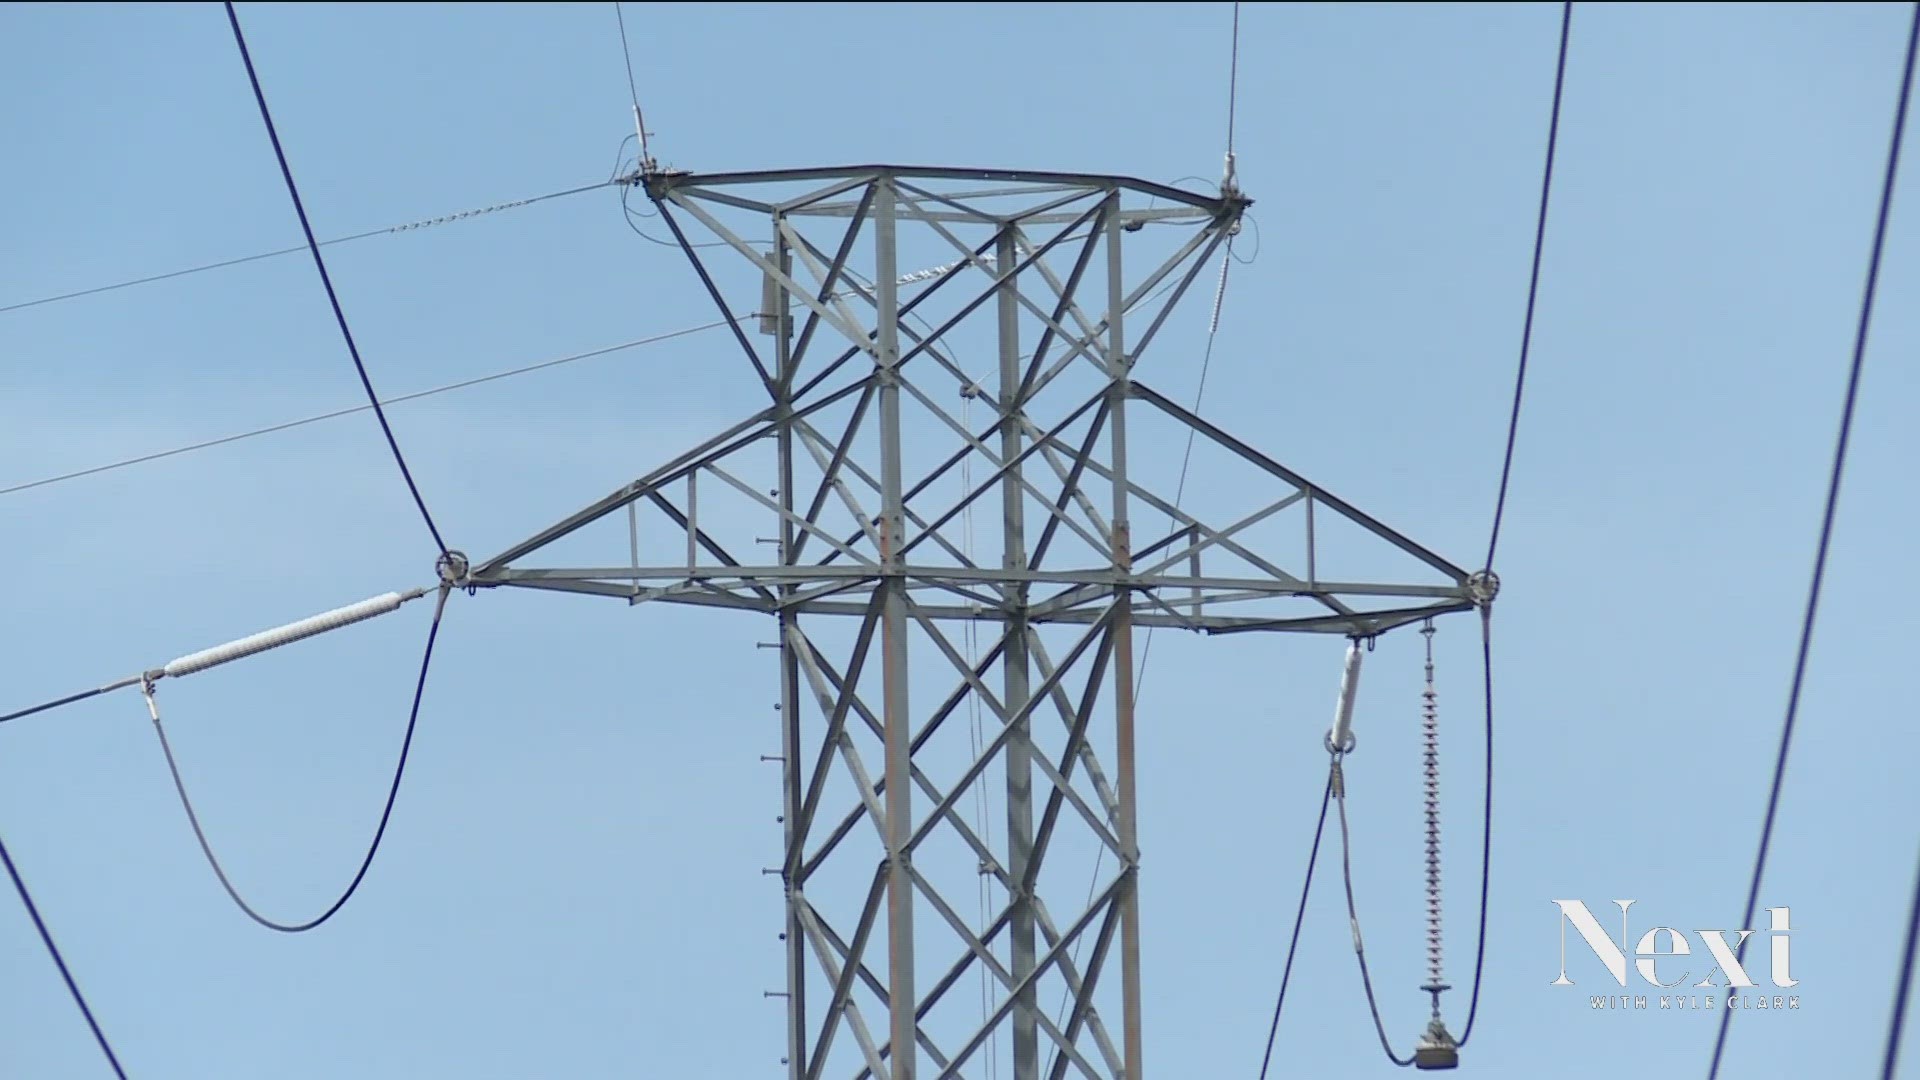 At a 6:30 a.m. meeting, the Public Utilities Commission began examining an Xcel Energy rate case. Former commissioner Ron Lehr helped explain what goes into that.